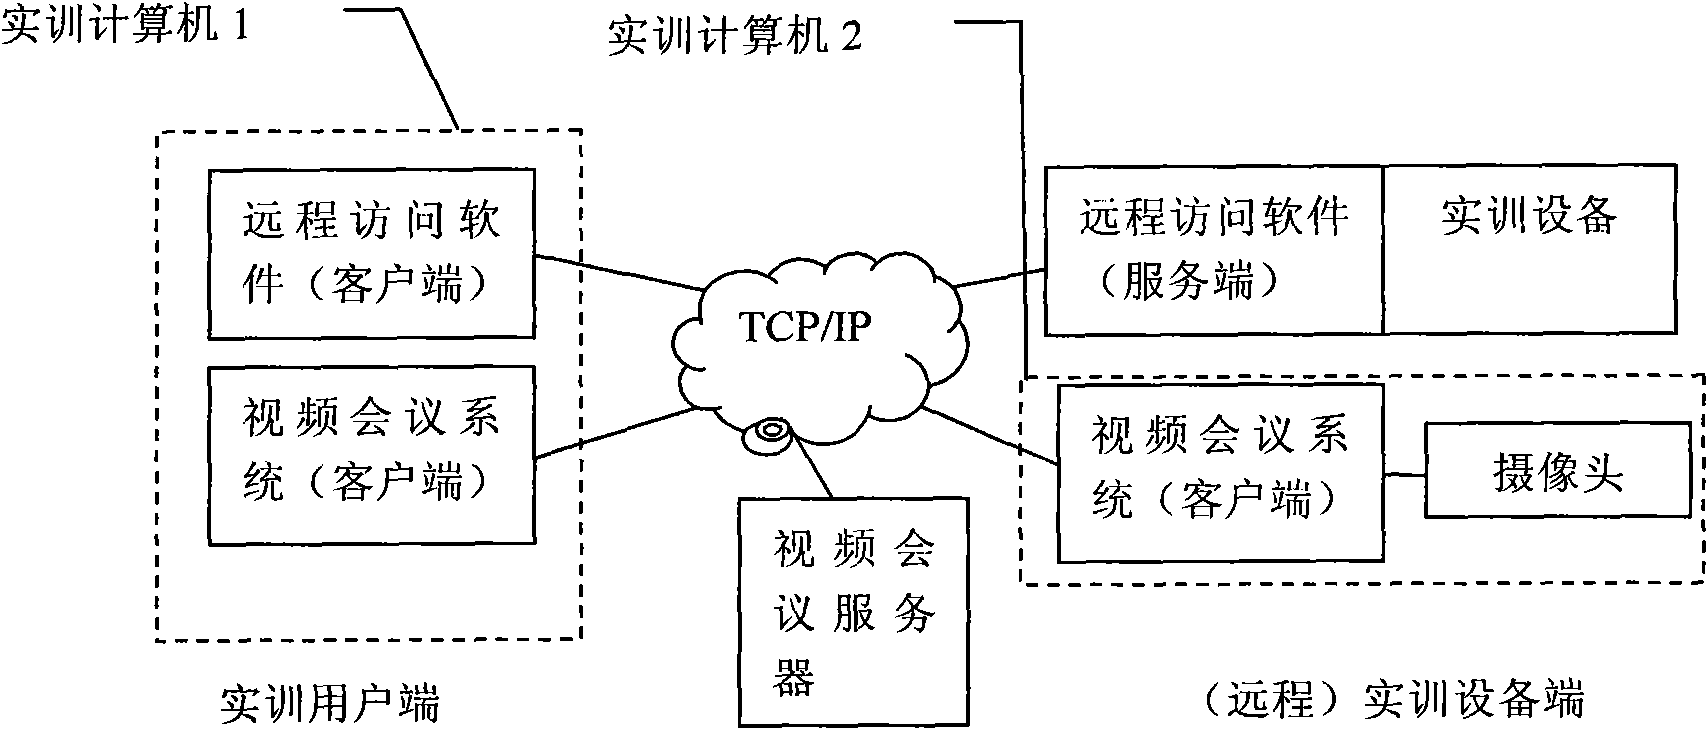 Remote access and video conference system-based remote practical training method